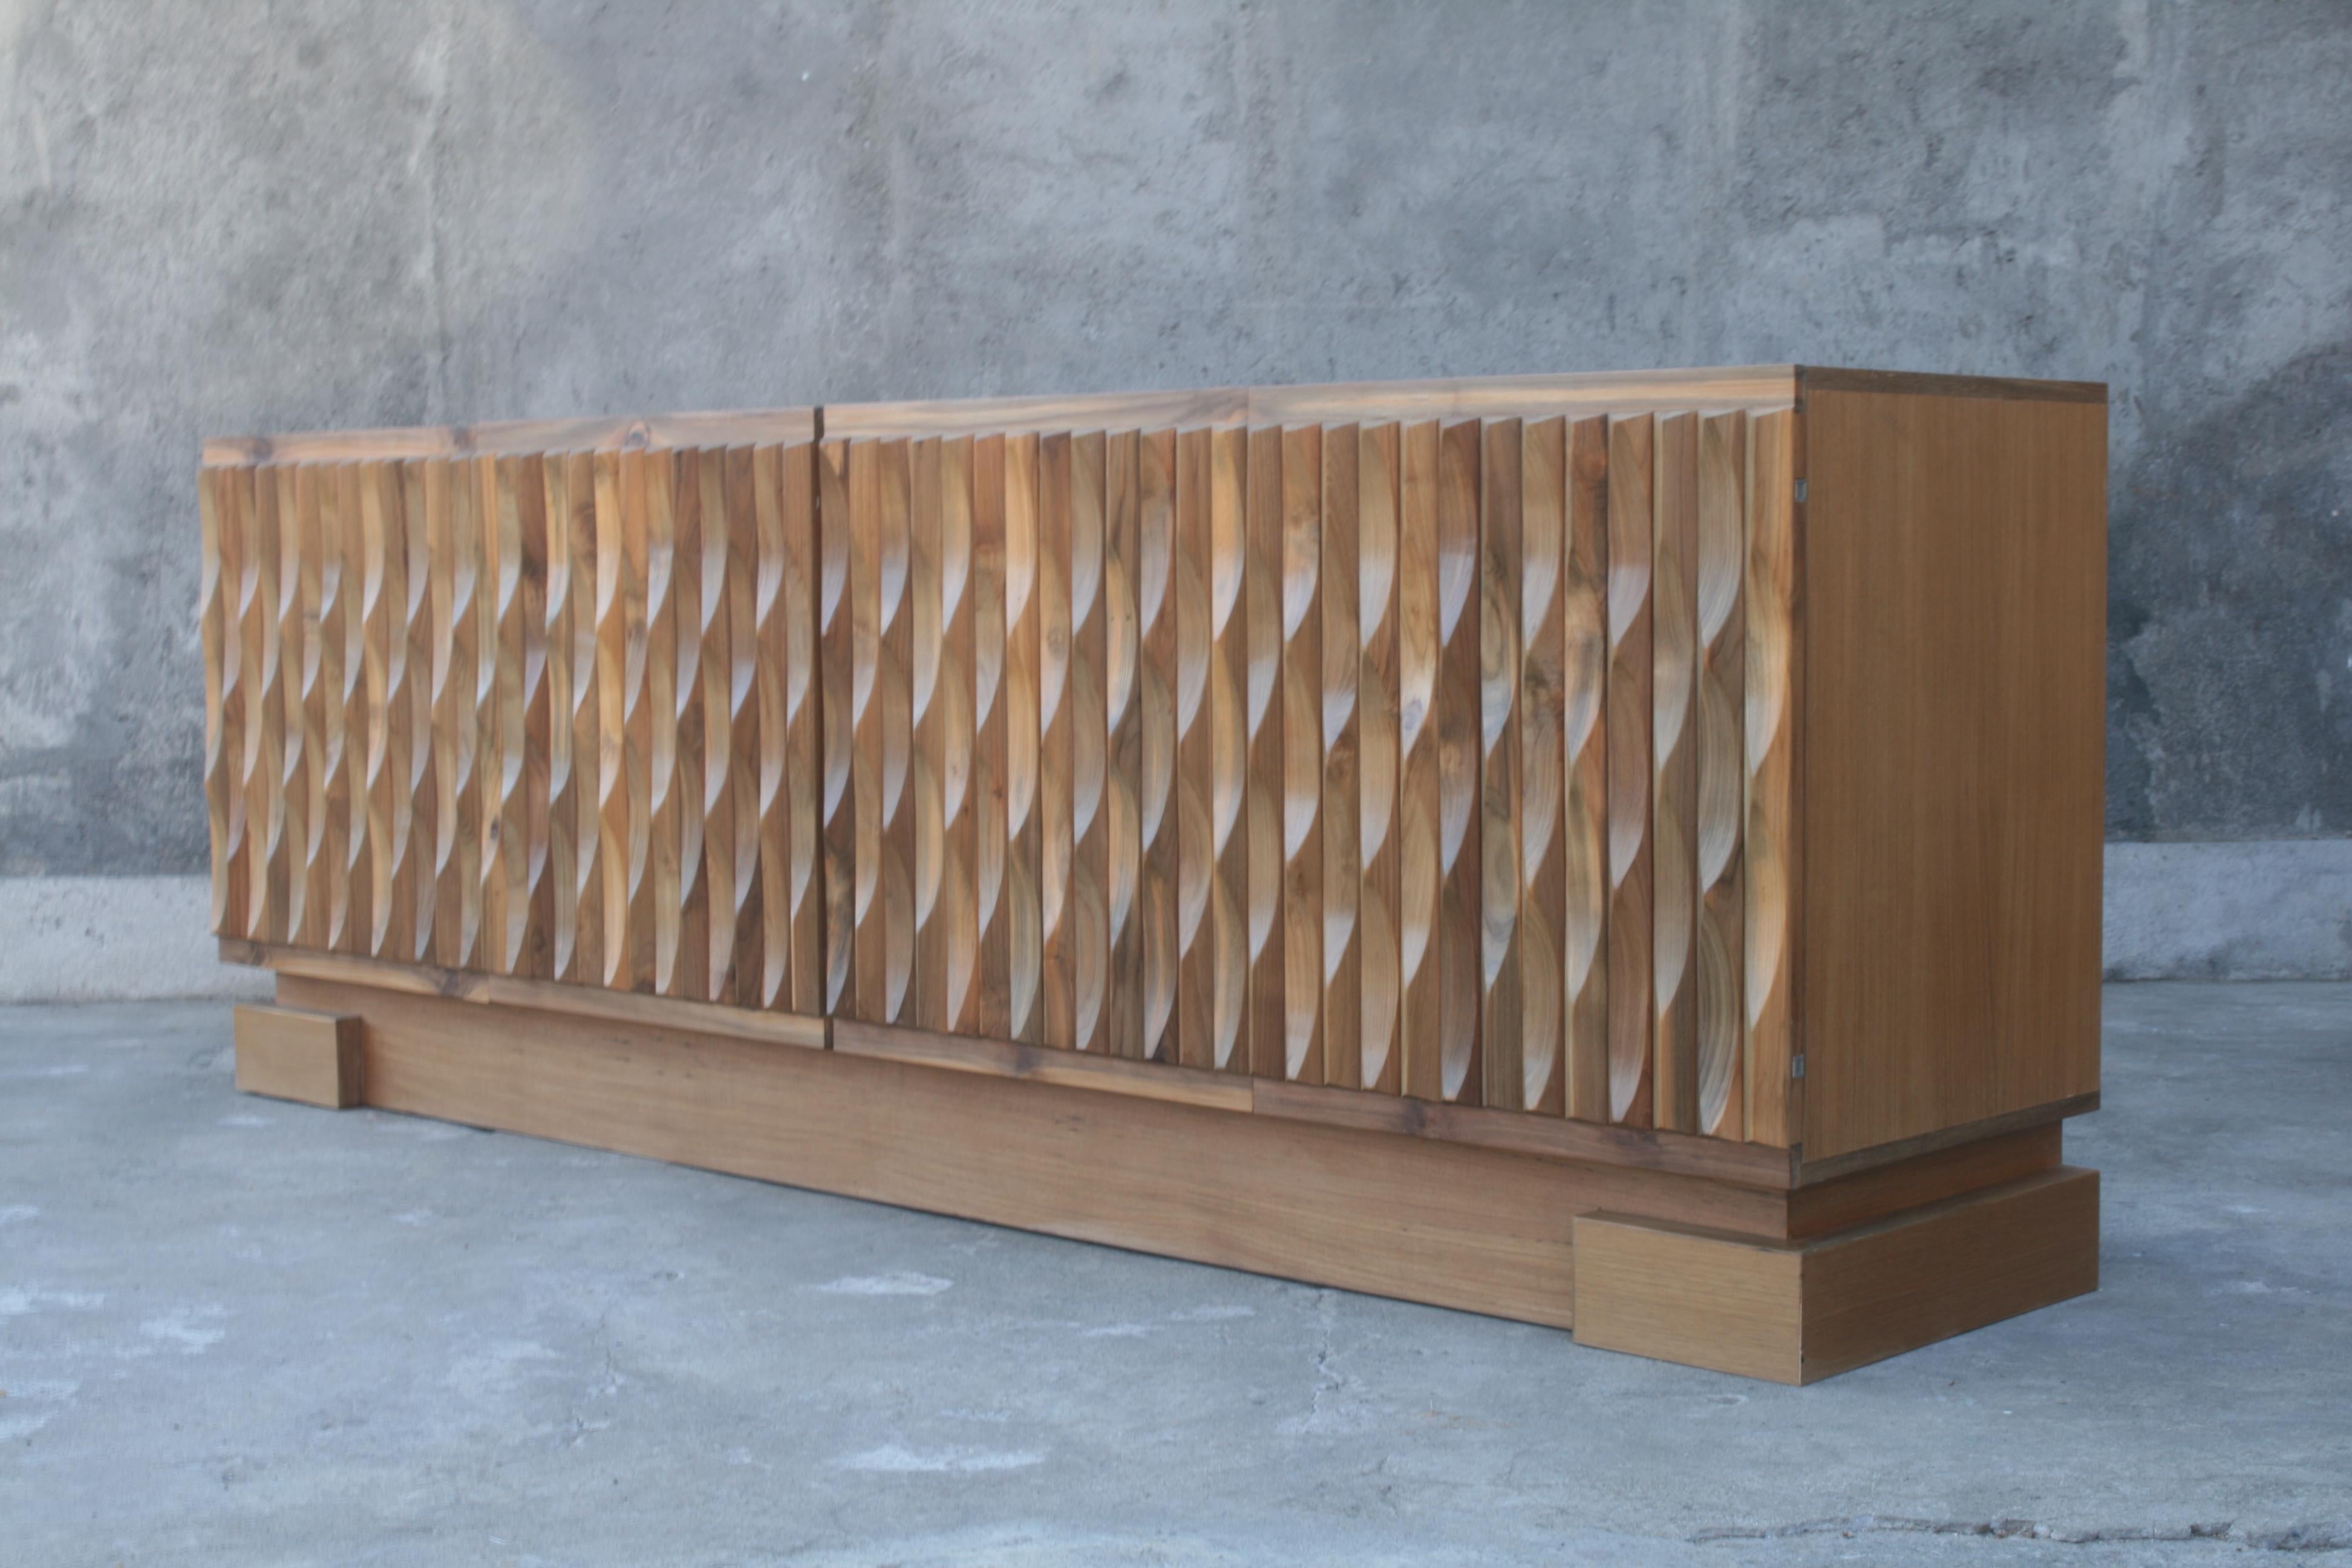 This sculptural sideboard has solid wooden graphic panels. We cleaned and stripped the doors completely and finished them with a natural oil. This cabinet looks fantastic, with only minor wear. Italian Prameta hinges. Made in Belgium by De